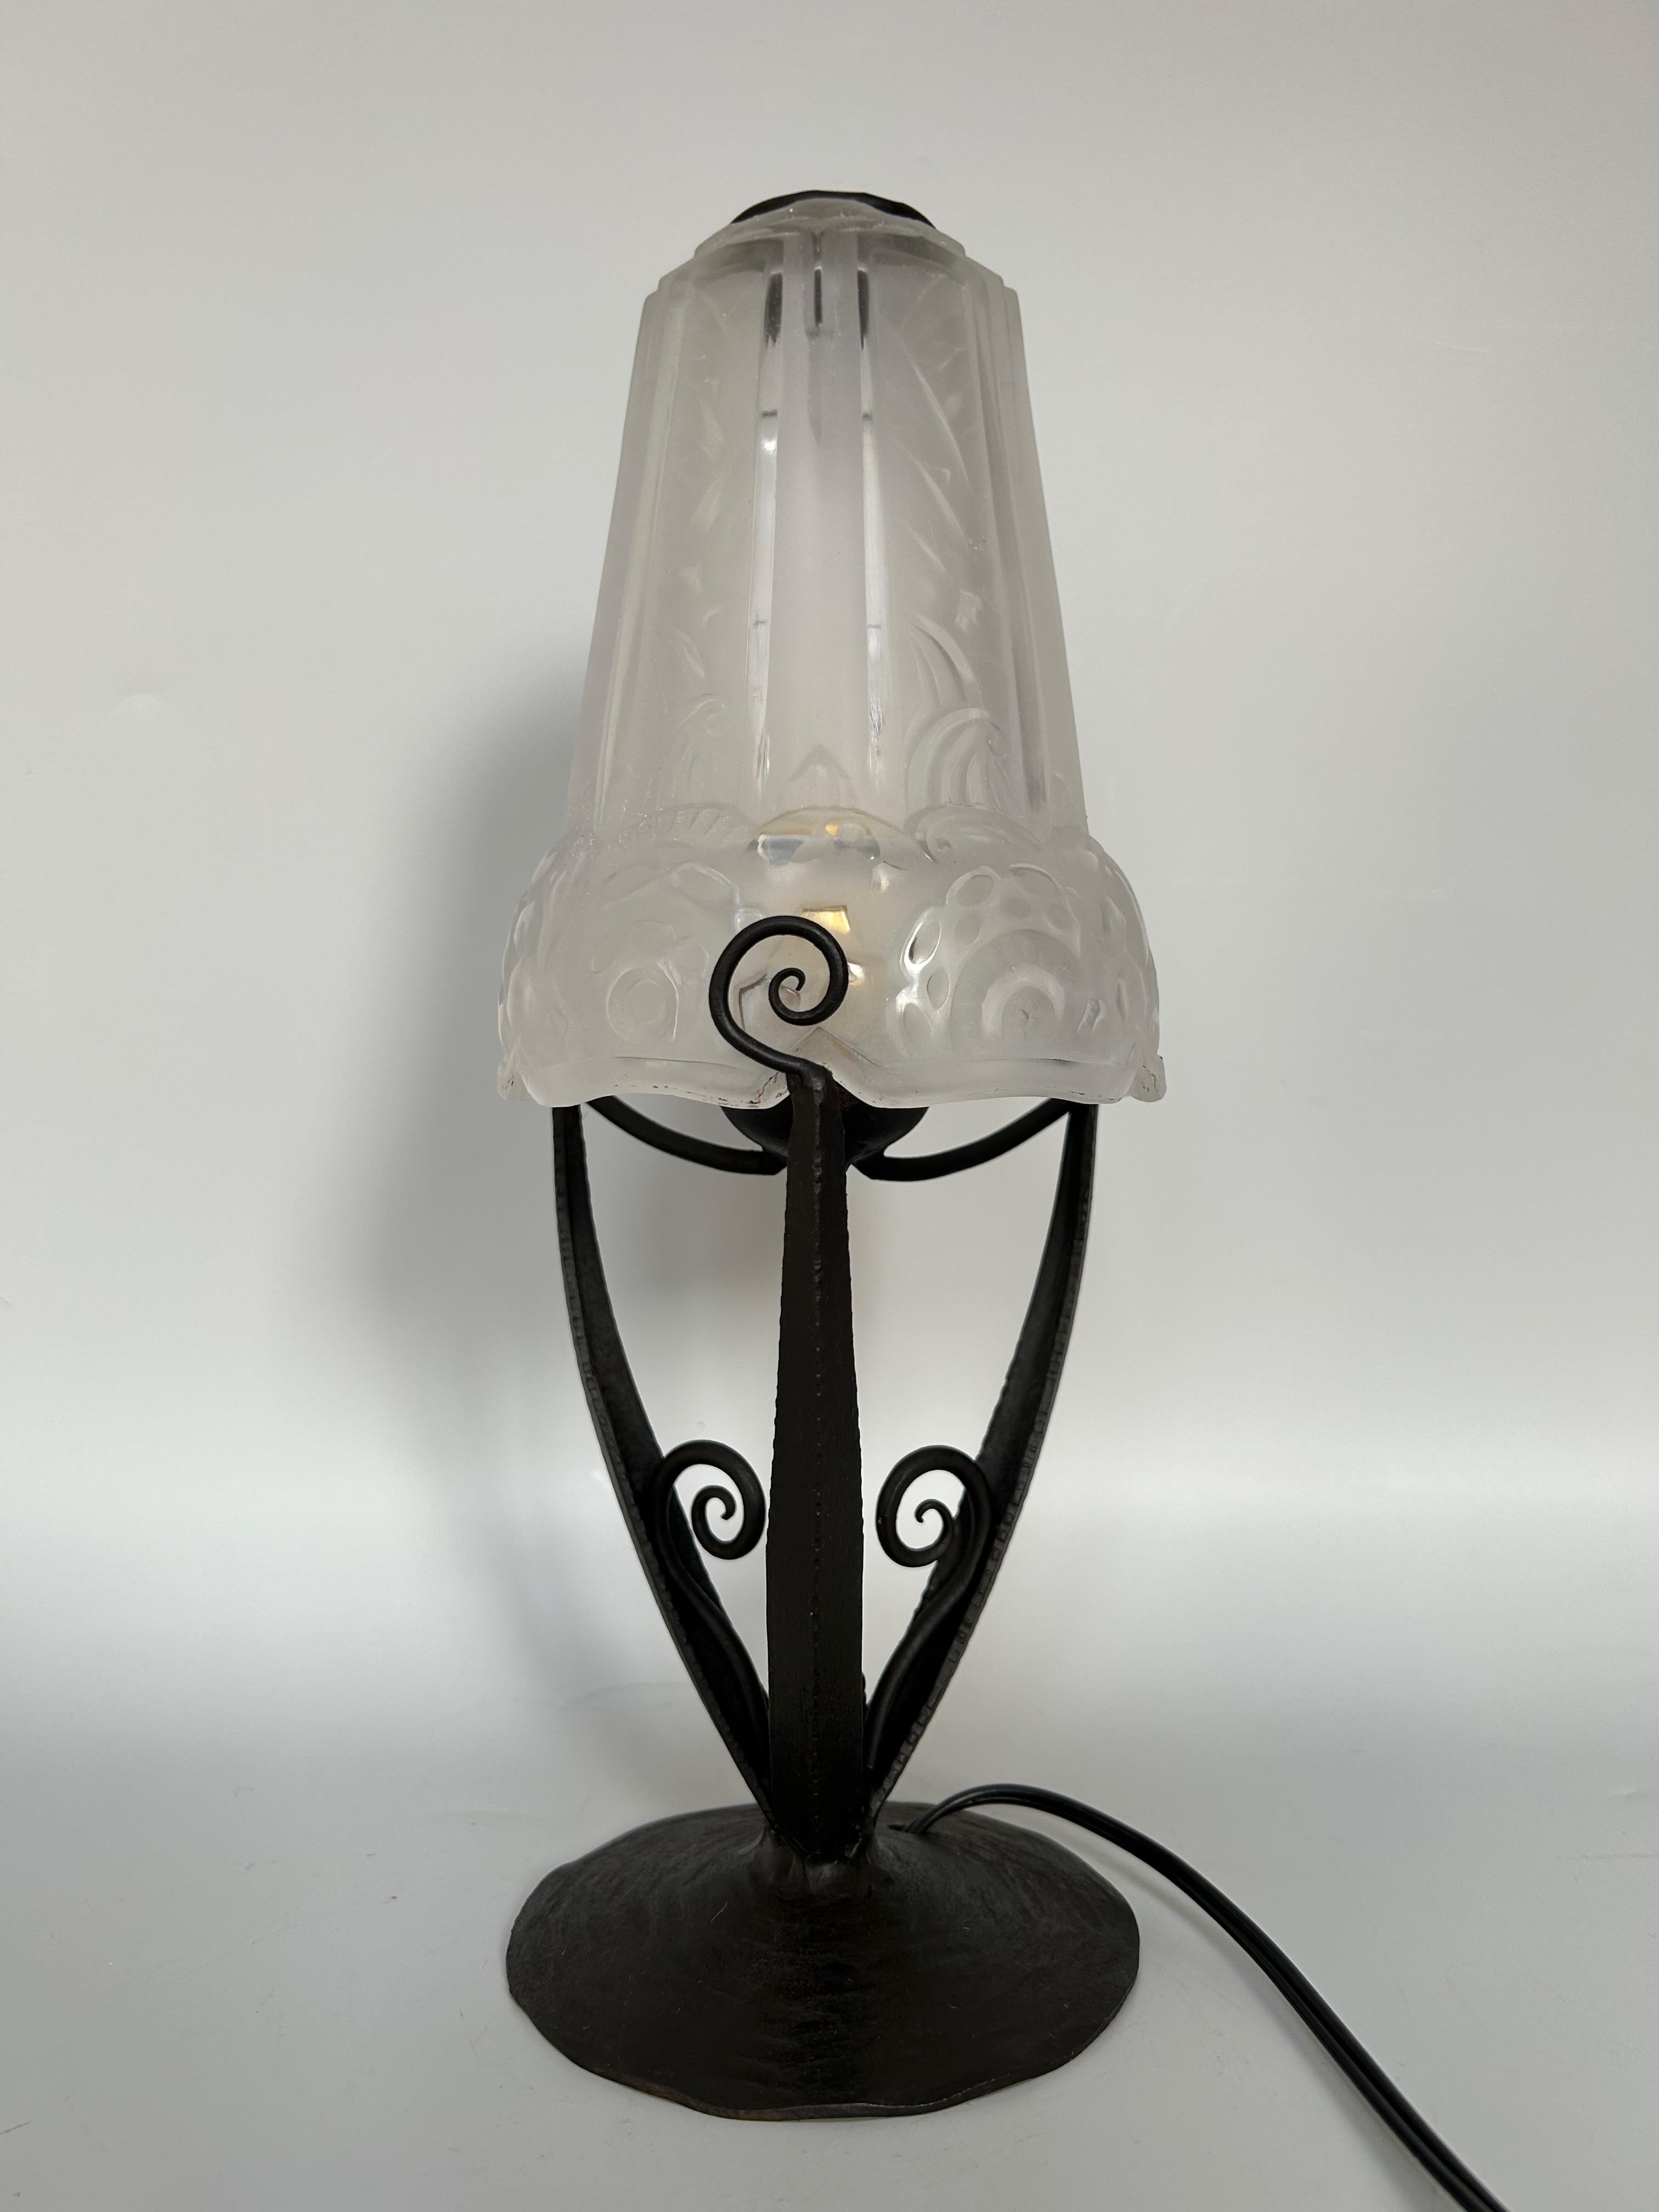 Art deco lamp circa 1930.
Wrought iron base and molded glass tulip with geometric and floral decoration.
Electrified and in perfect condition.

Diameter: 10,5 cm
Height: 29 cm
Weight: 1 Kg

Jean Pierre Léon MAYNADIER (1888 - 1948) :
Célèbre bronzier